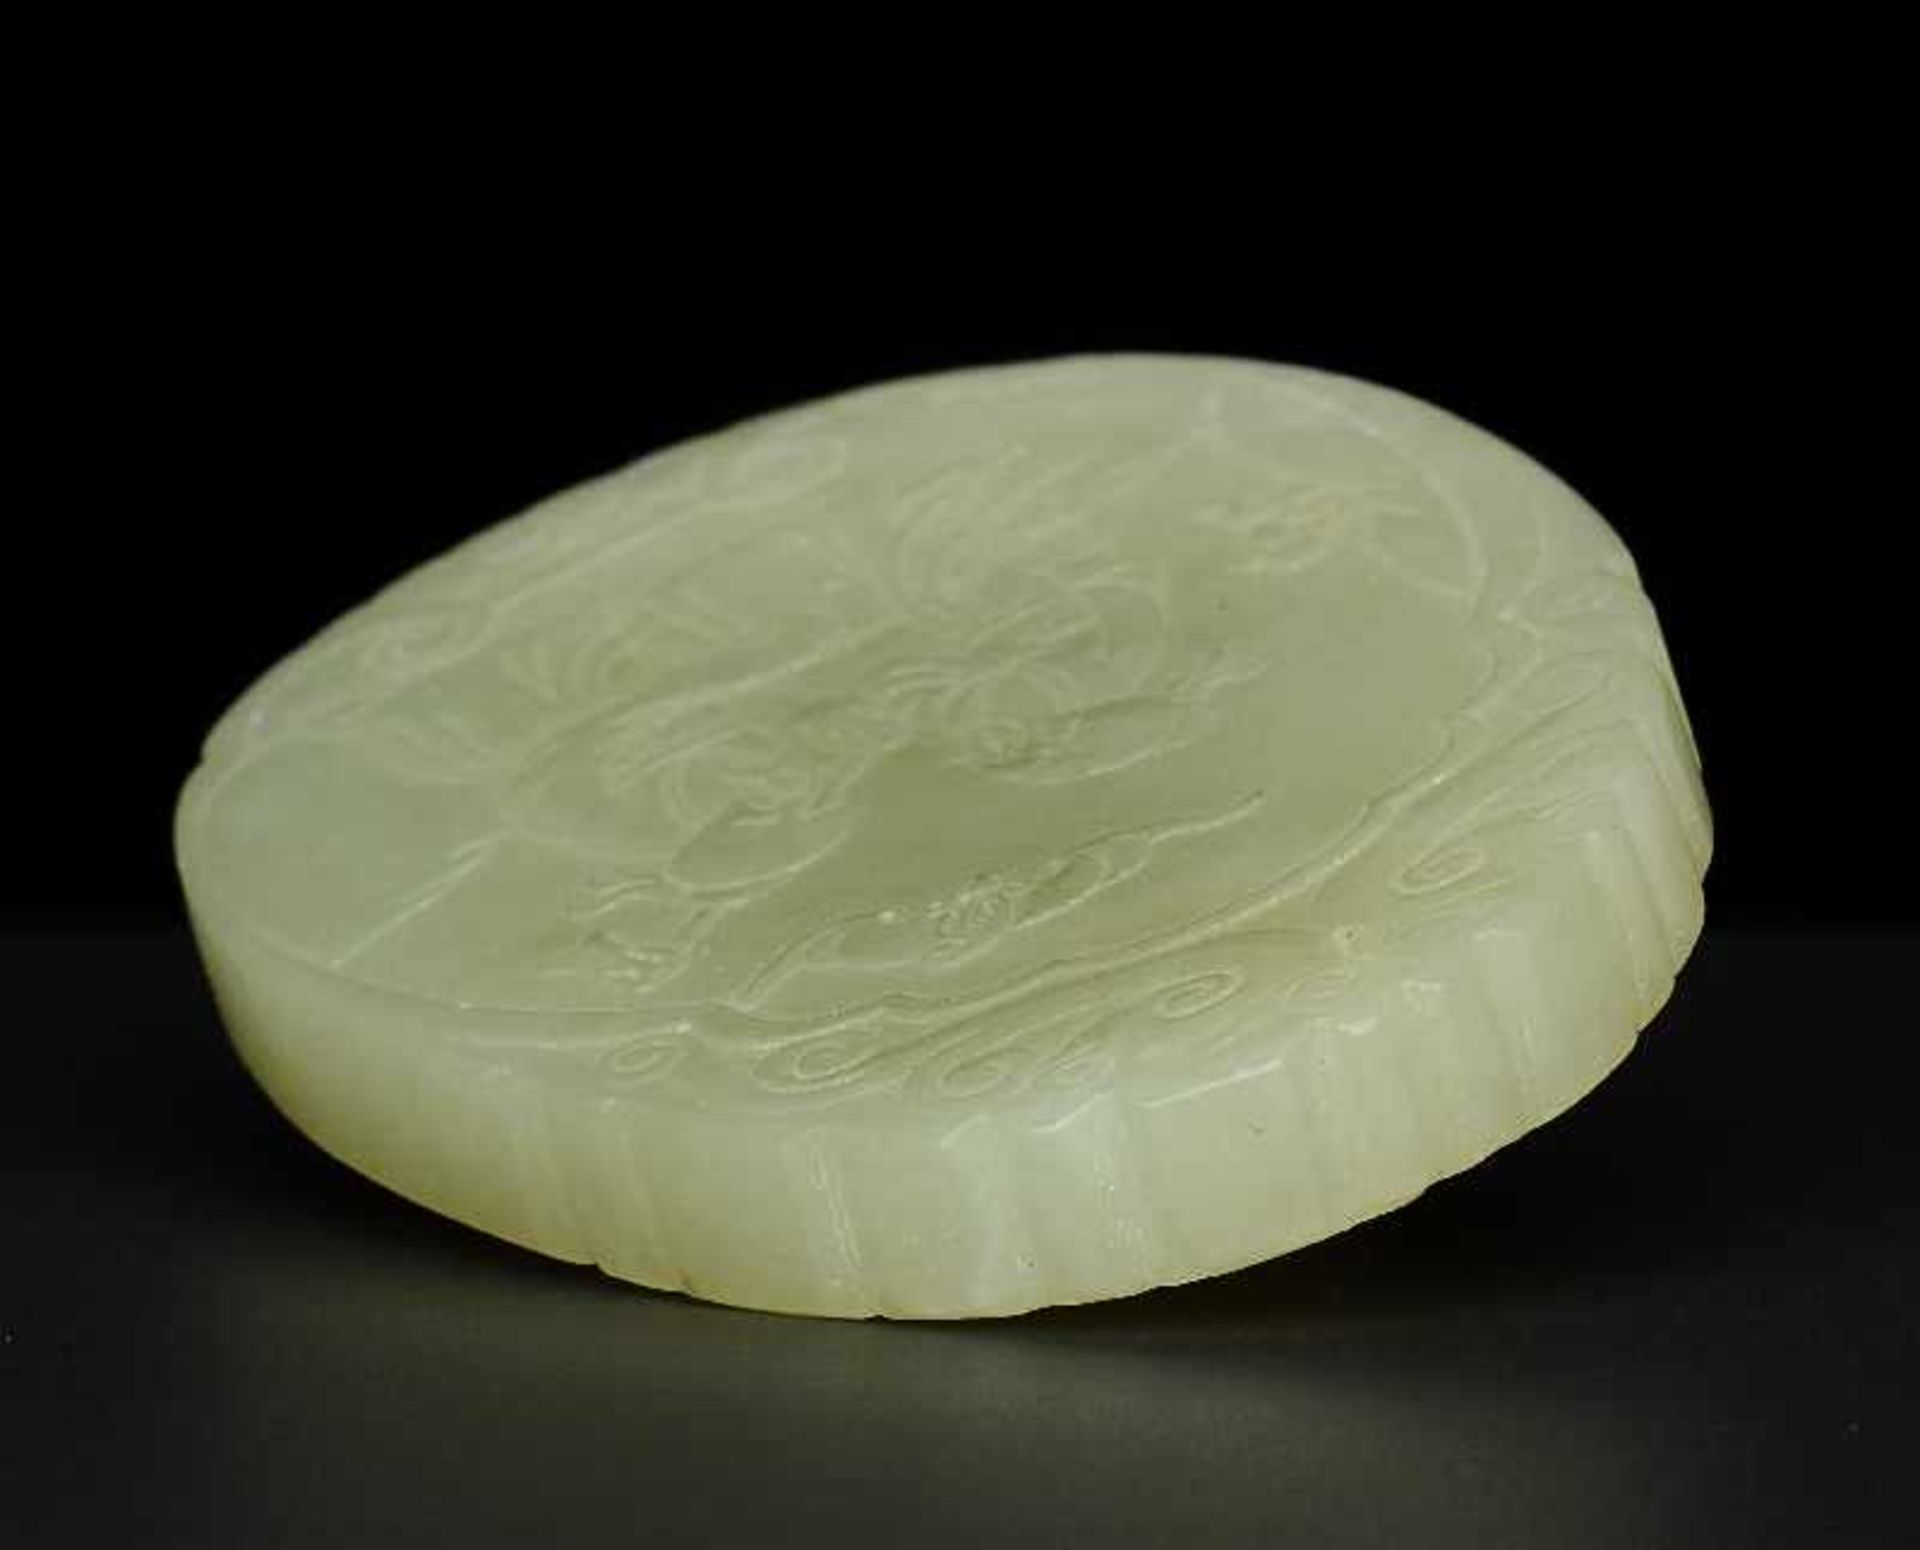 DEKORATIVER ANHÄNGER MIT WEISEN Jade. China, ca. Qing-Dynastie, 19. – Anfang 20. Jh. Ovoide Form, - Image 3 of 4